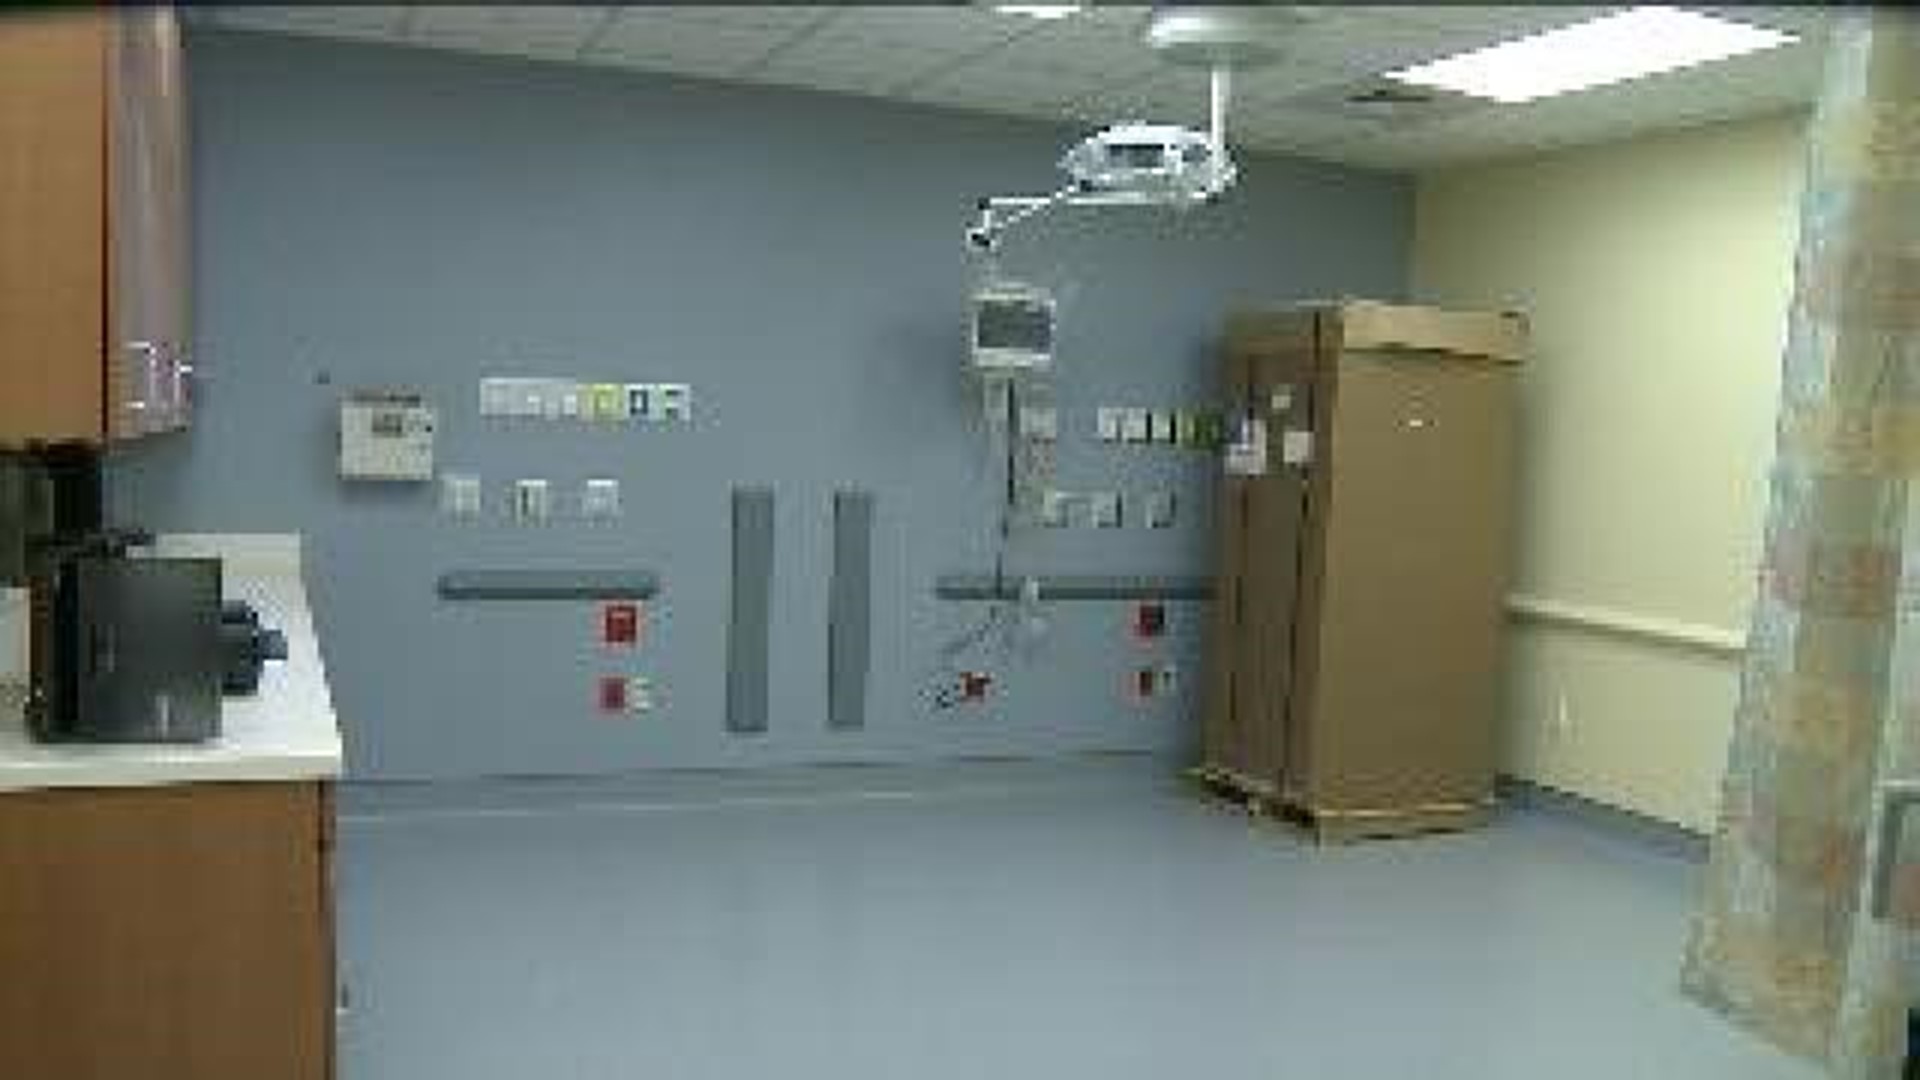 Celebrating A New Hospital In Susquehanna County